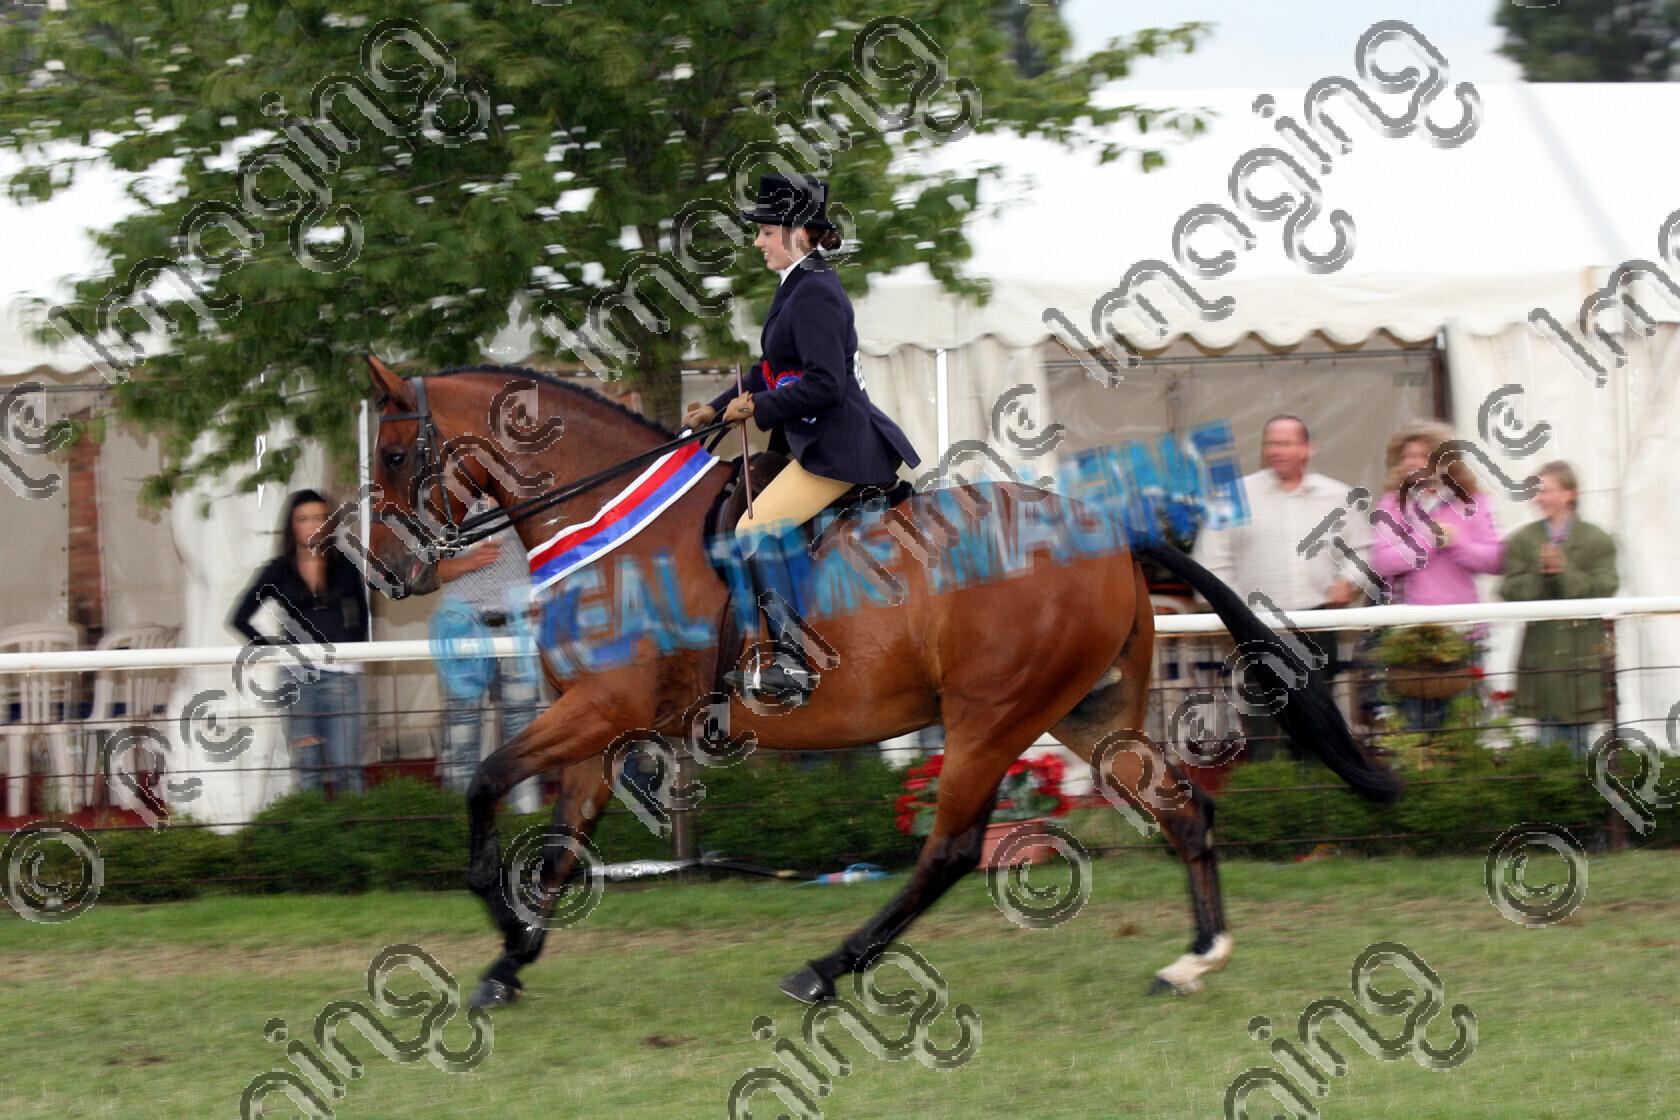 S06-46-11-215 
 Keywords: Ponies Association (UK) Summer Championship Show Whittakers Lord Open Hunter Champion bay cantering canter action lap of honour sash rosette rosettes evening performance